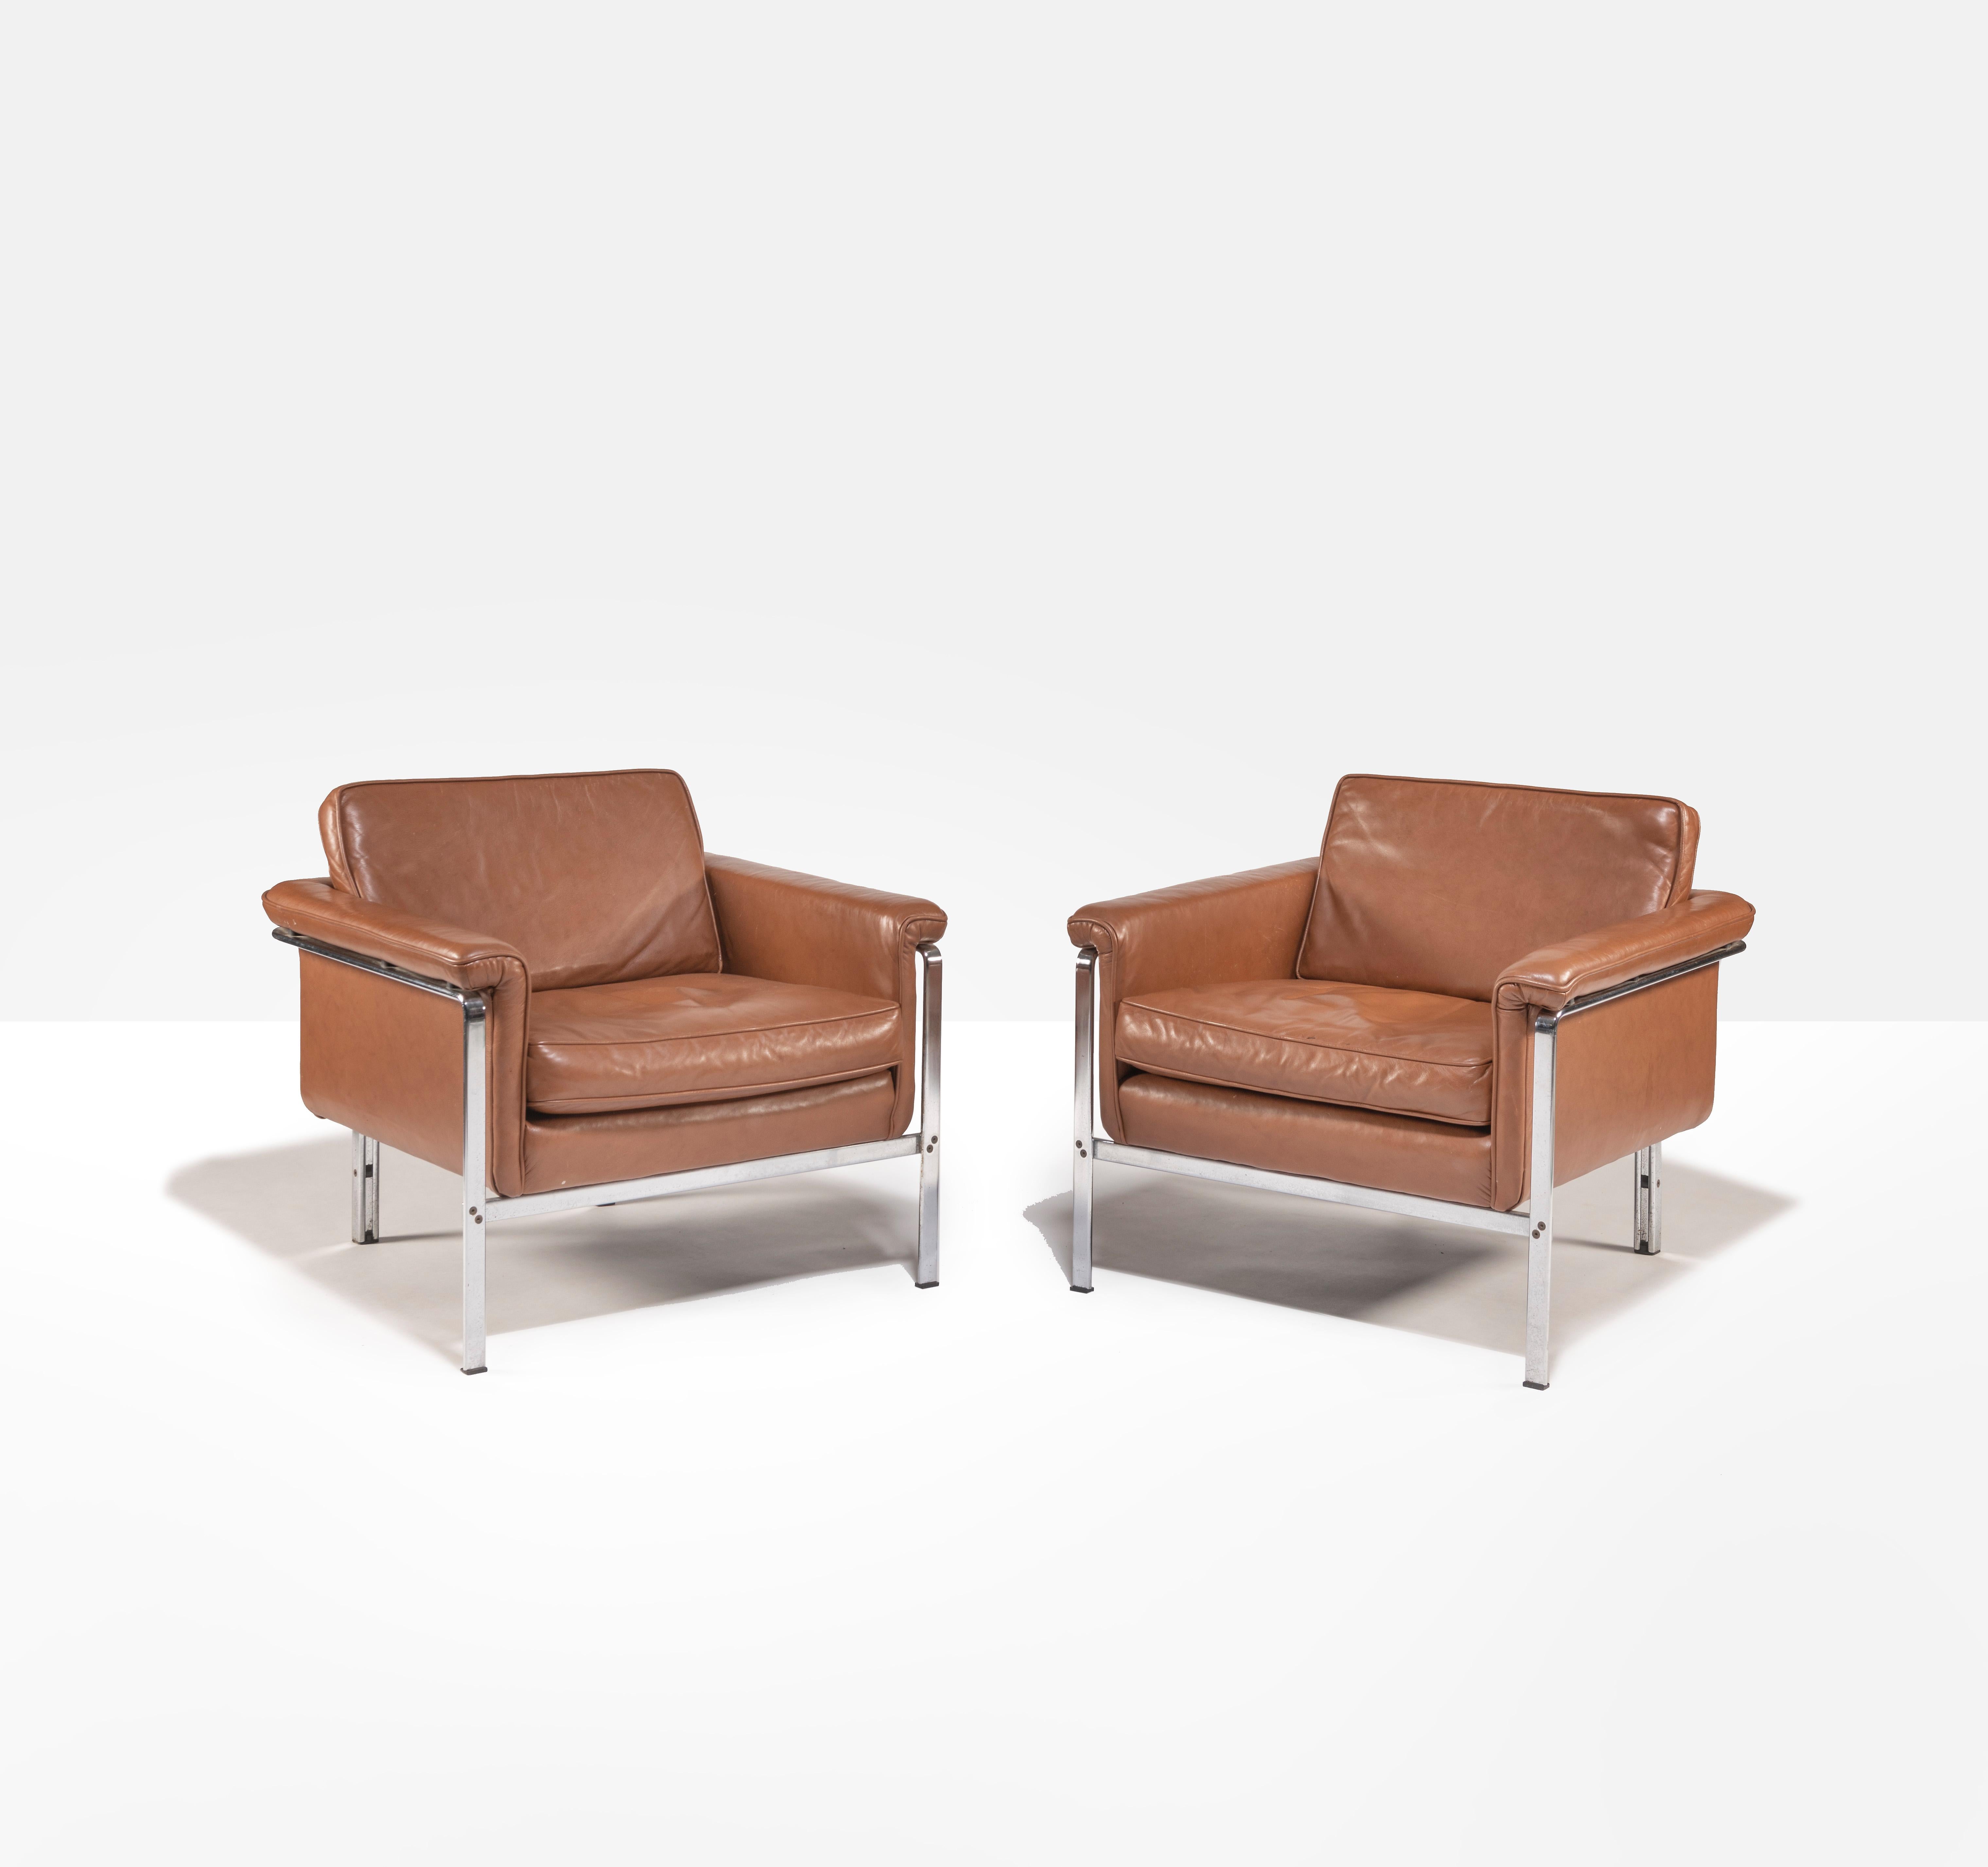 Pair lounge chairs model 6910 by Horst Brüning for Alfred Kill International. Leather and steel, Germany, 1967. Handsome and comfortable pair of lounge chairs in very good condition with original cognac leather.